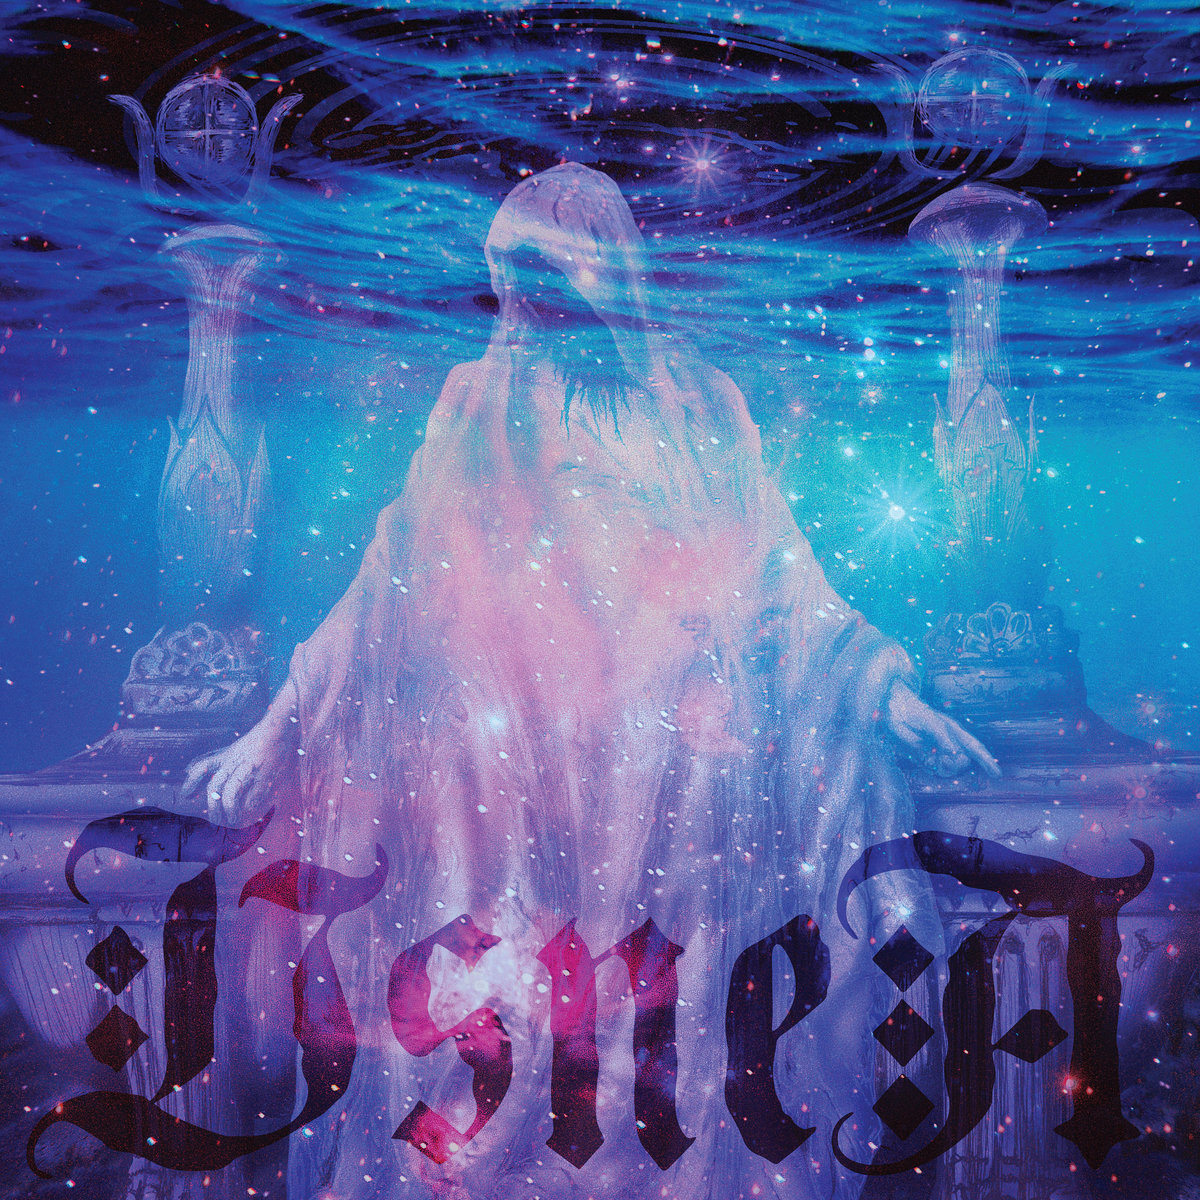 Usnea - Bathed In Light